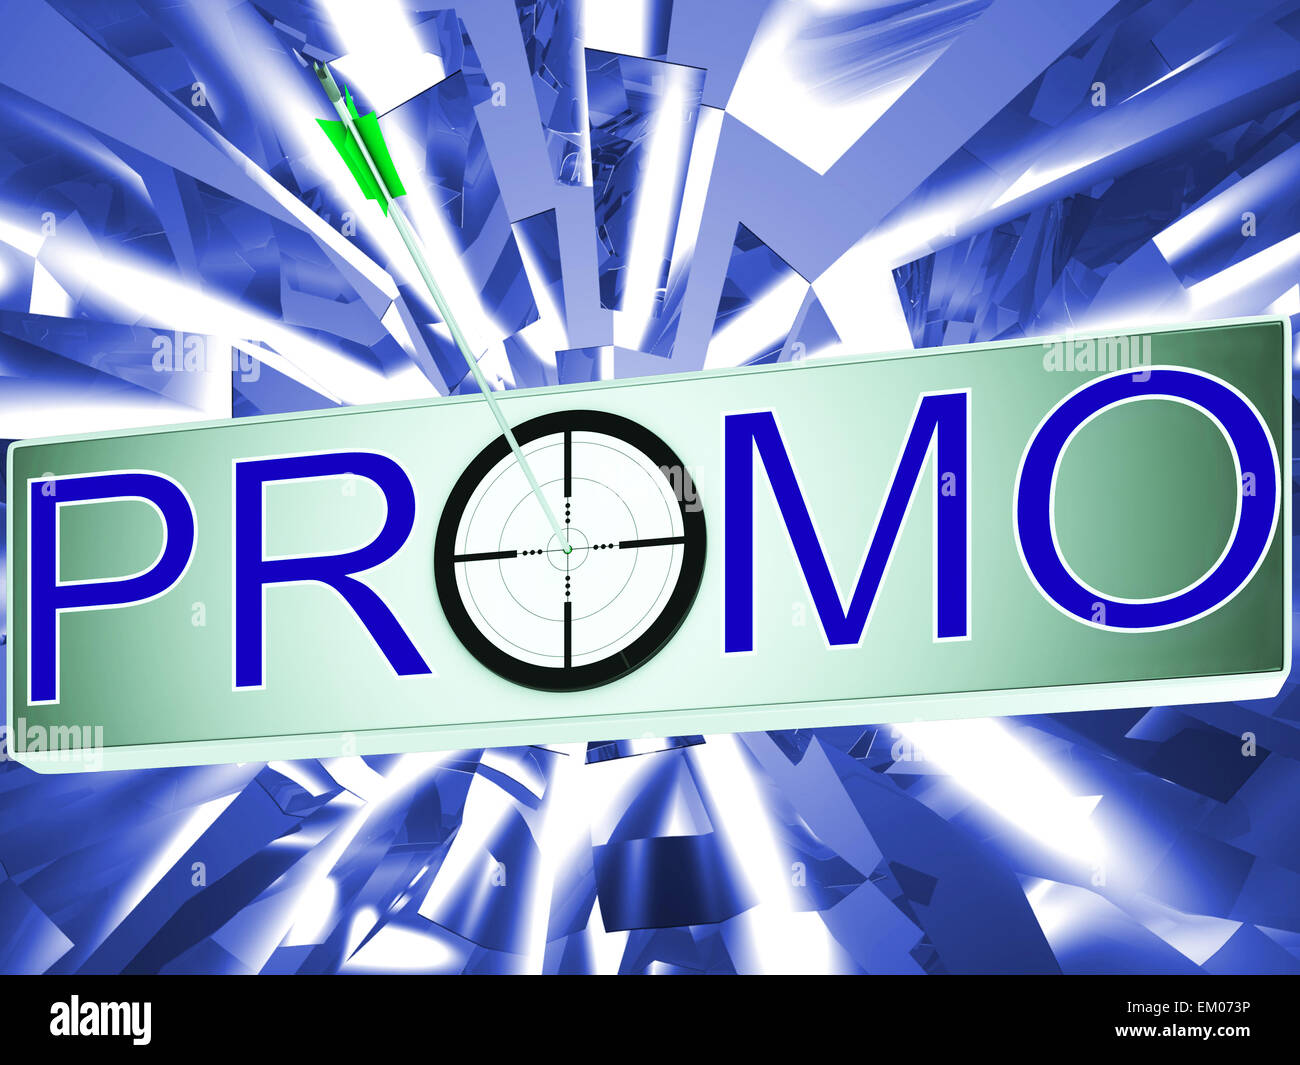 Promo Shows Promotion Discount Sale Stock Photo